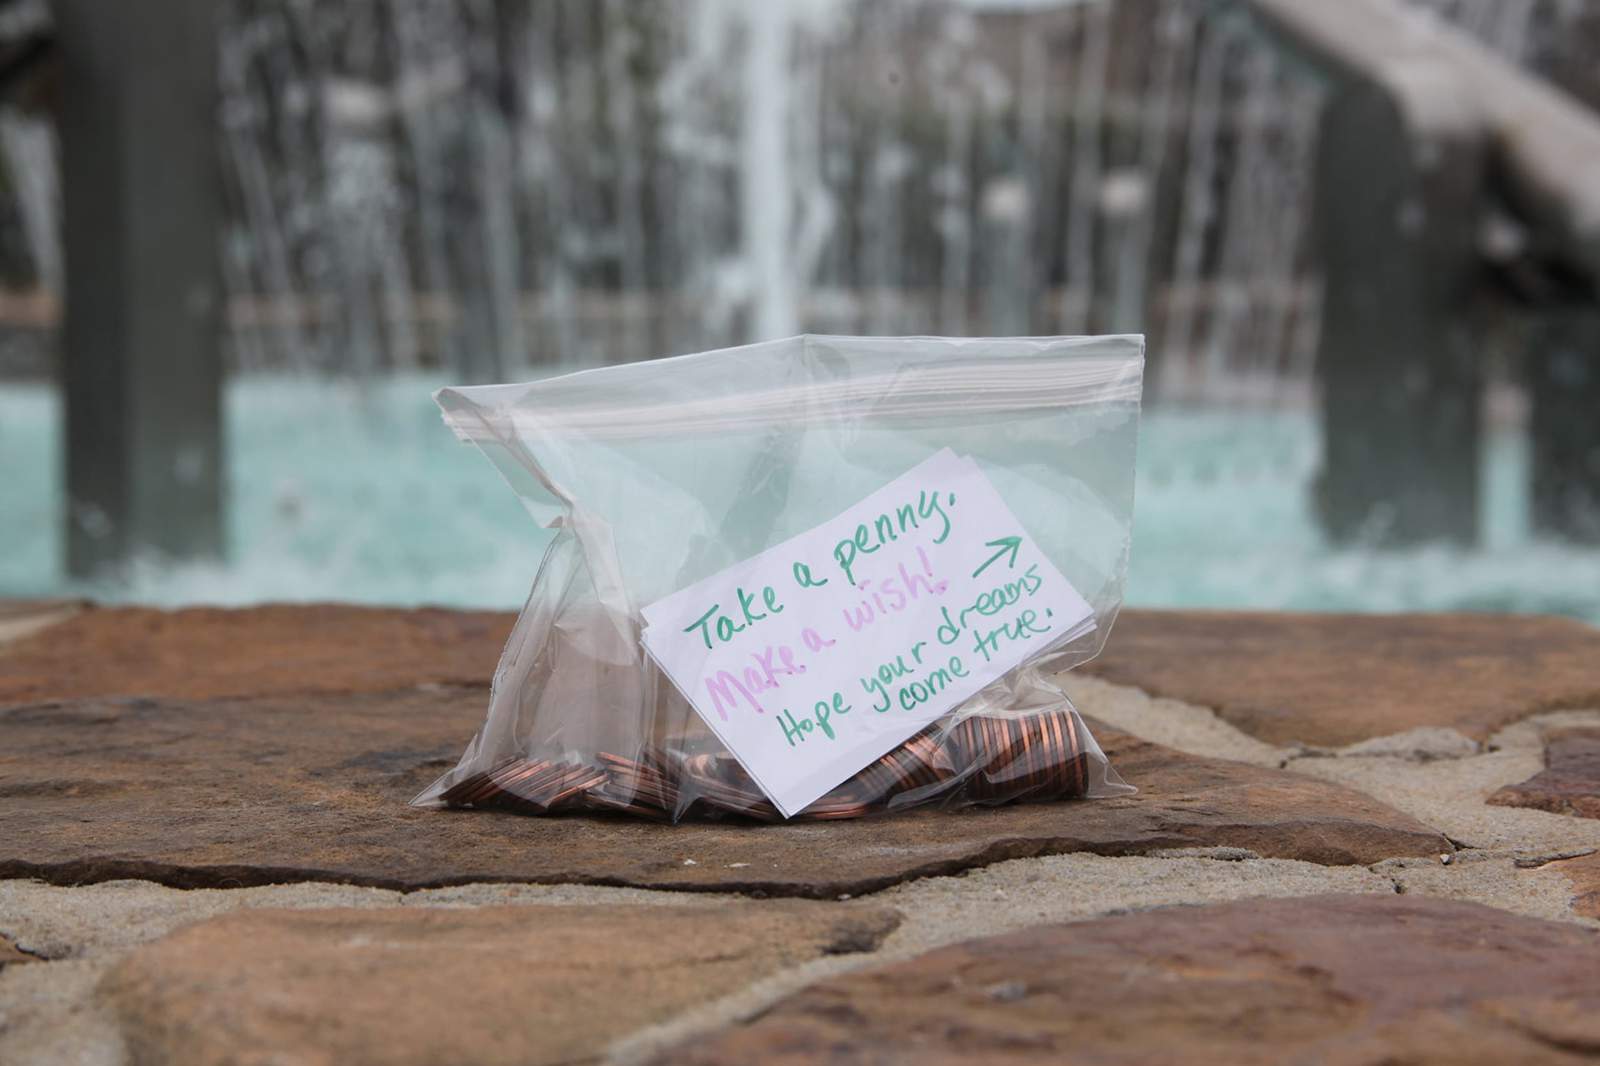 Cookies, hot cocoa, pick-me-up notes: 'Sparks' of kindness